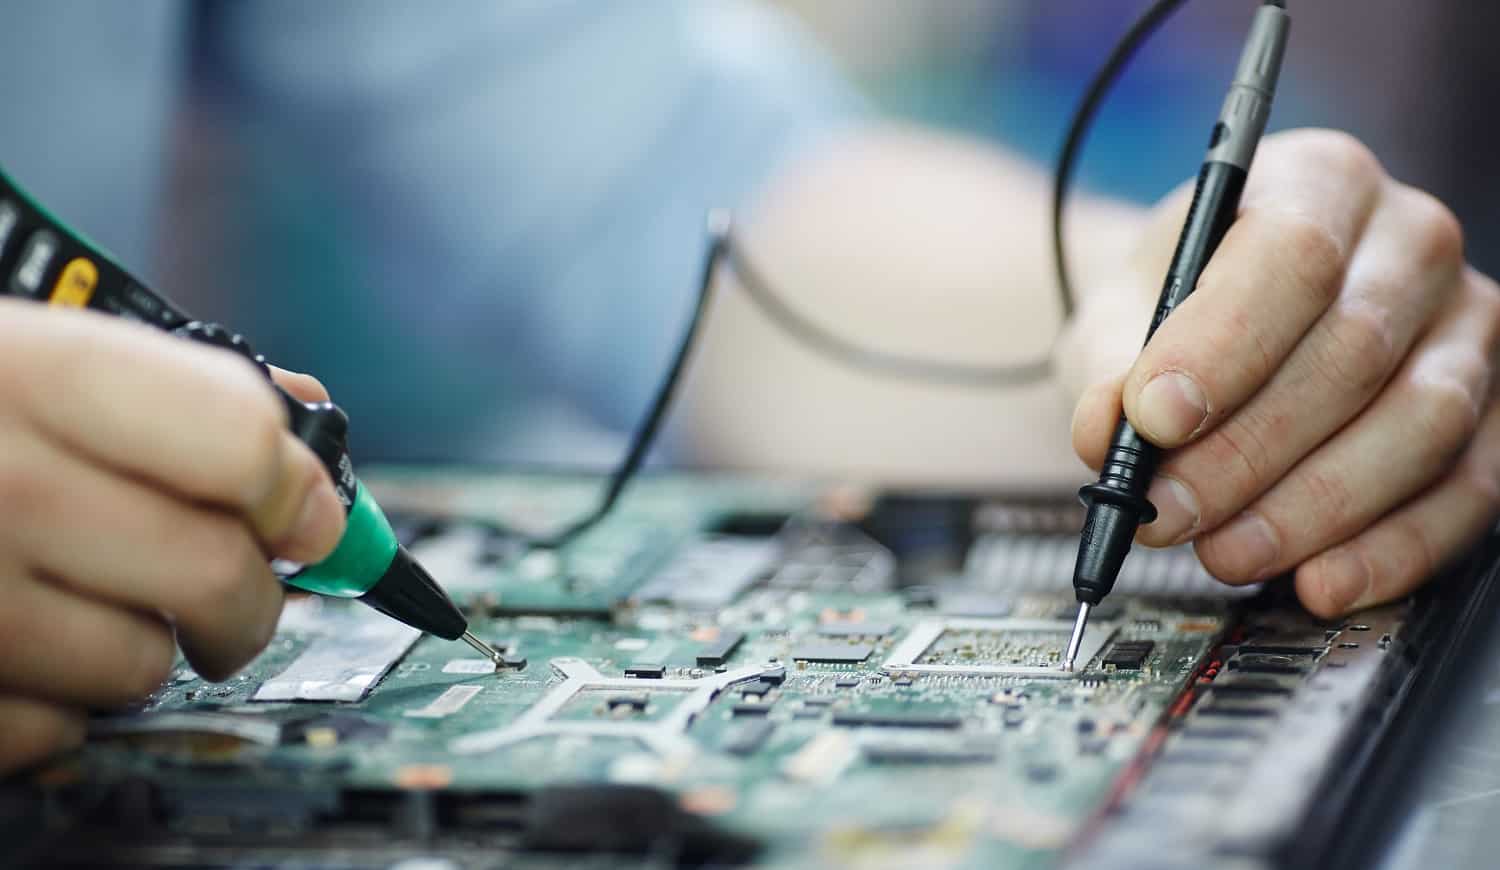 Closeup shot of male hands testing electric current voltage in circuit board of disassembled laptop using multimeter tool on table in maintenance shop